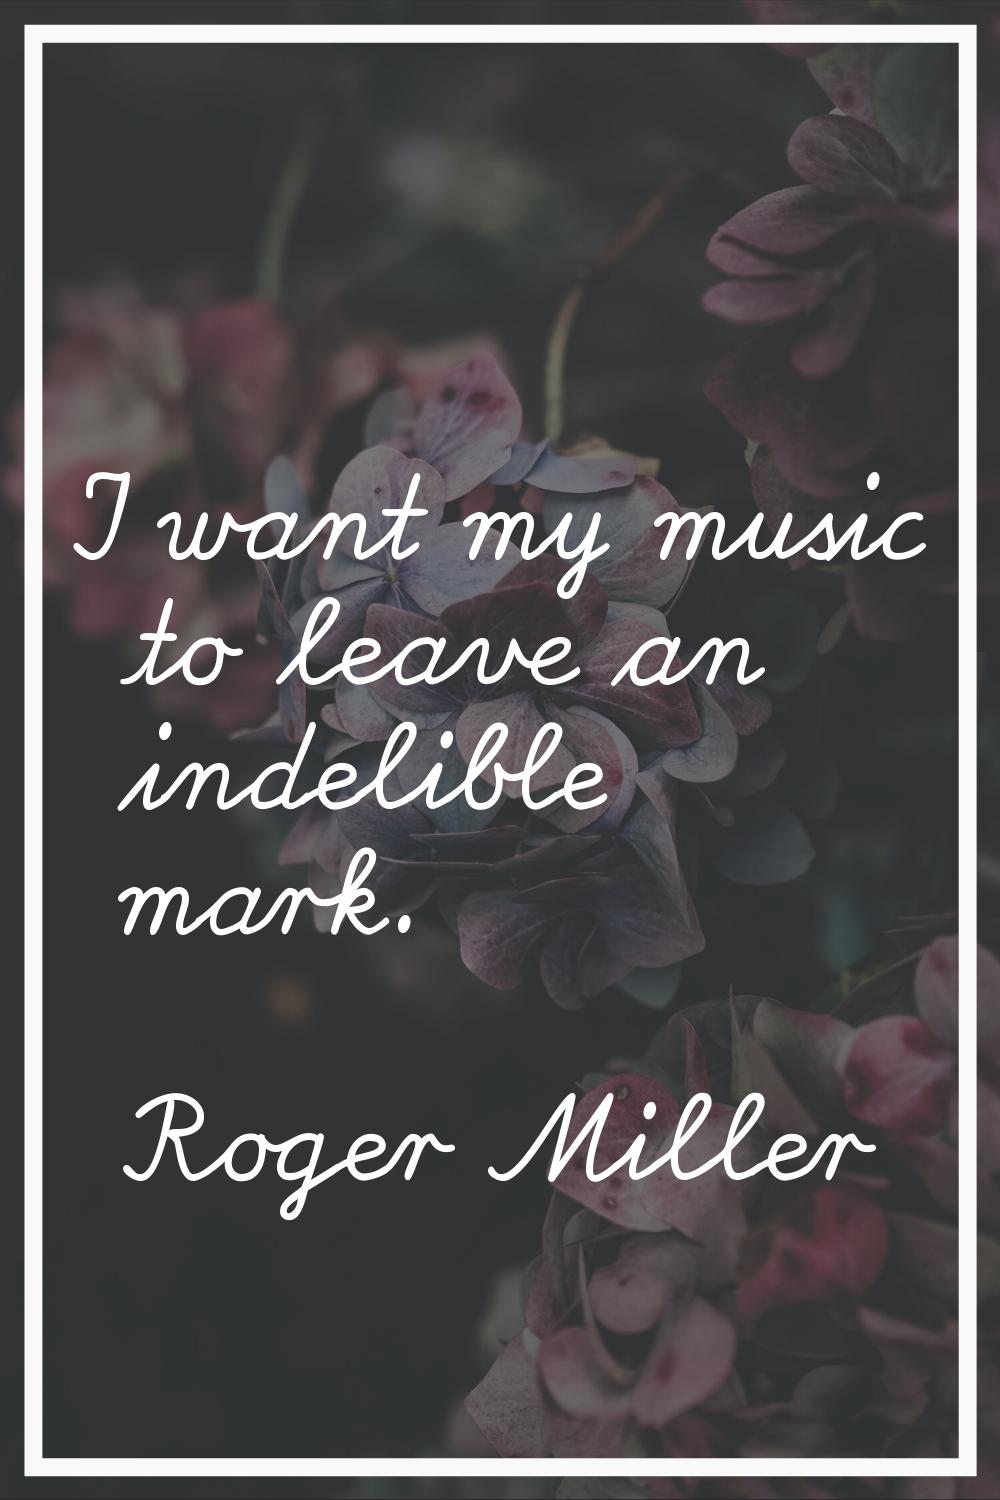 I want my music to leave an indelible mark.